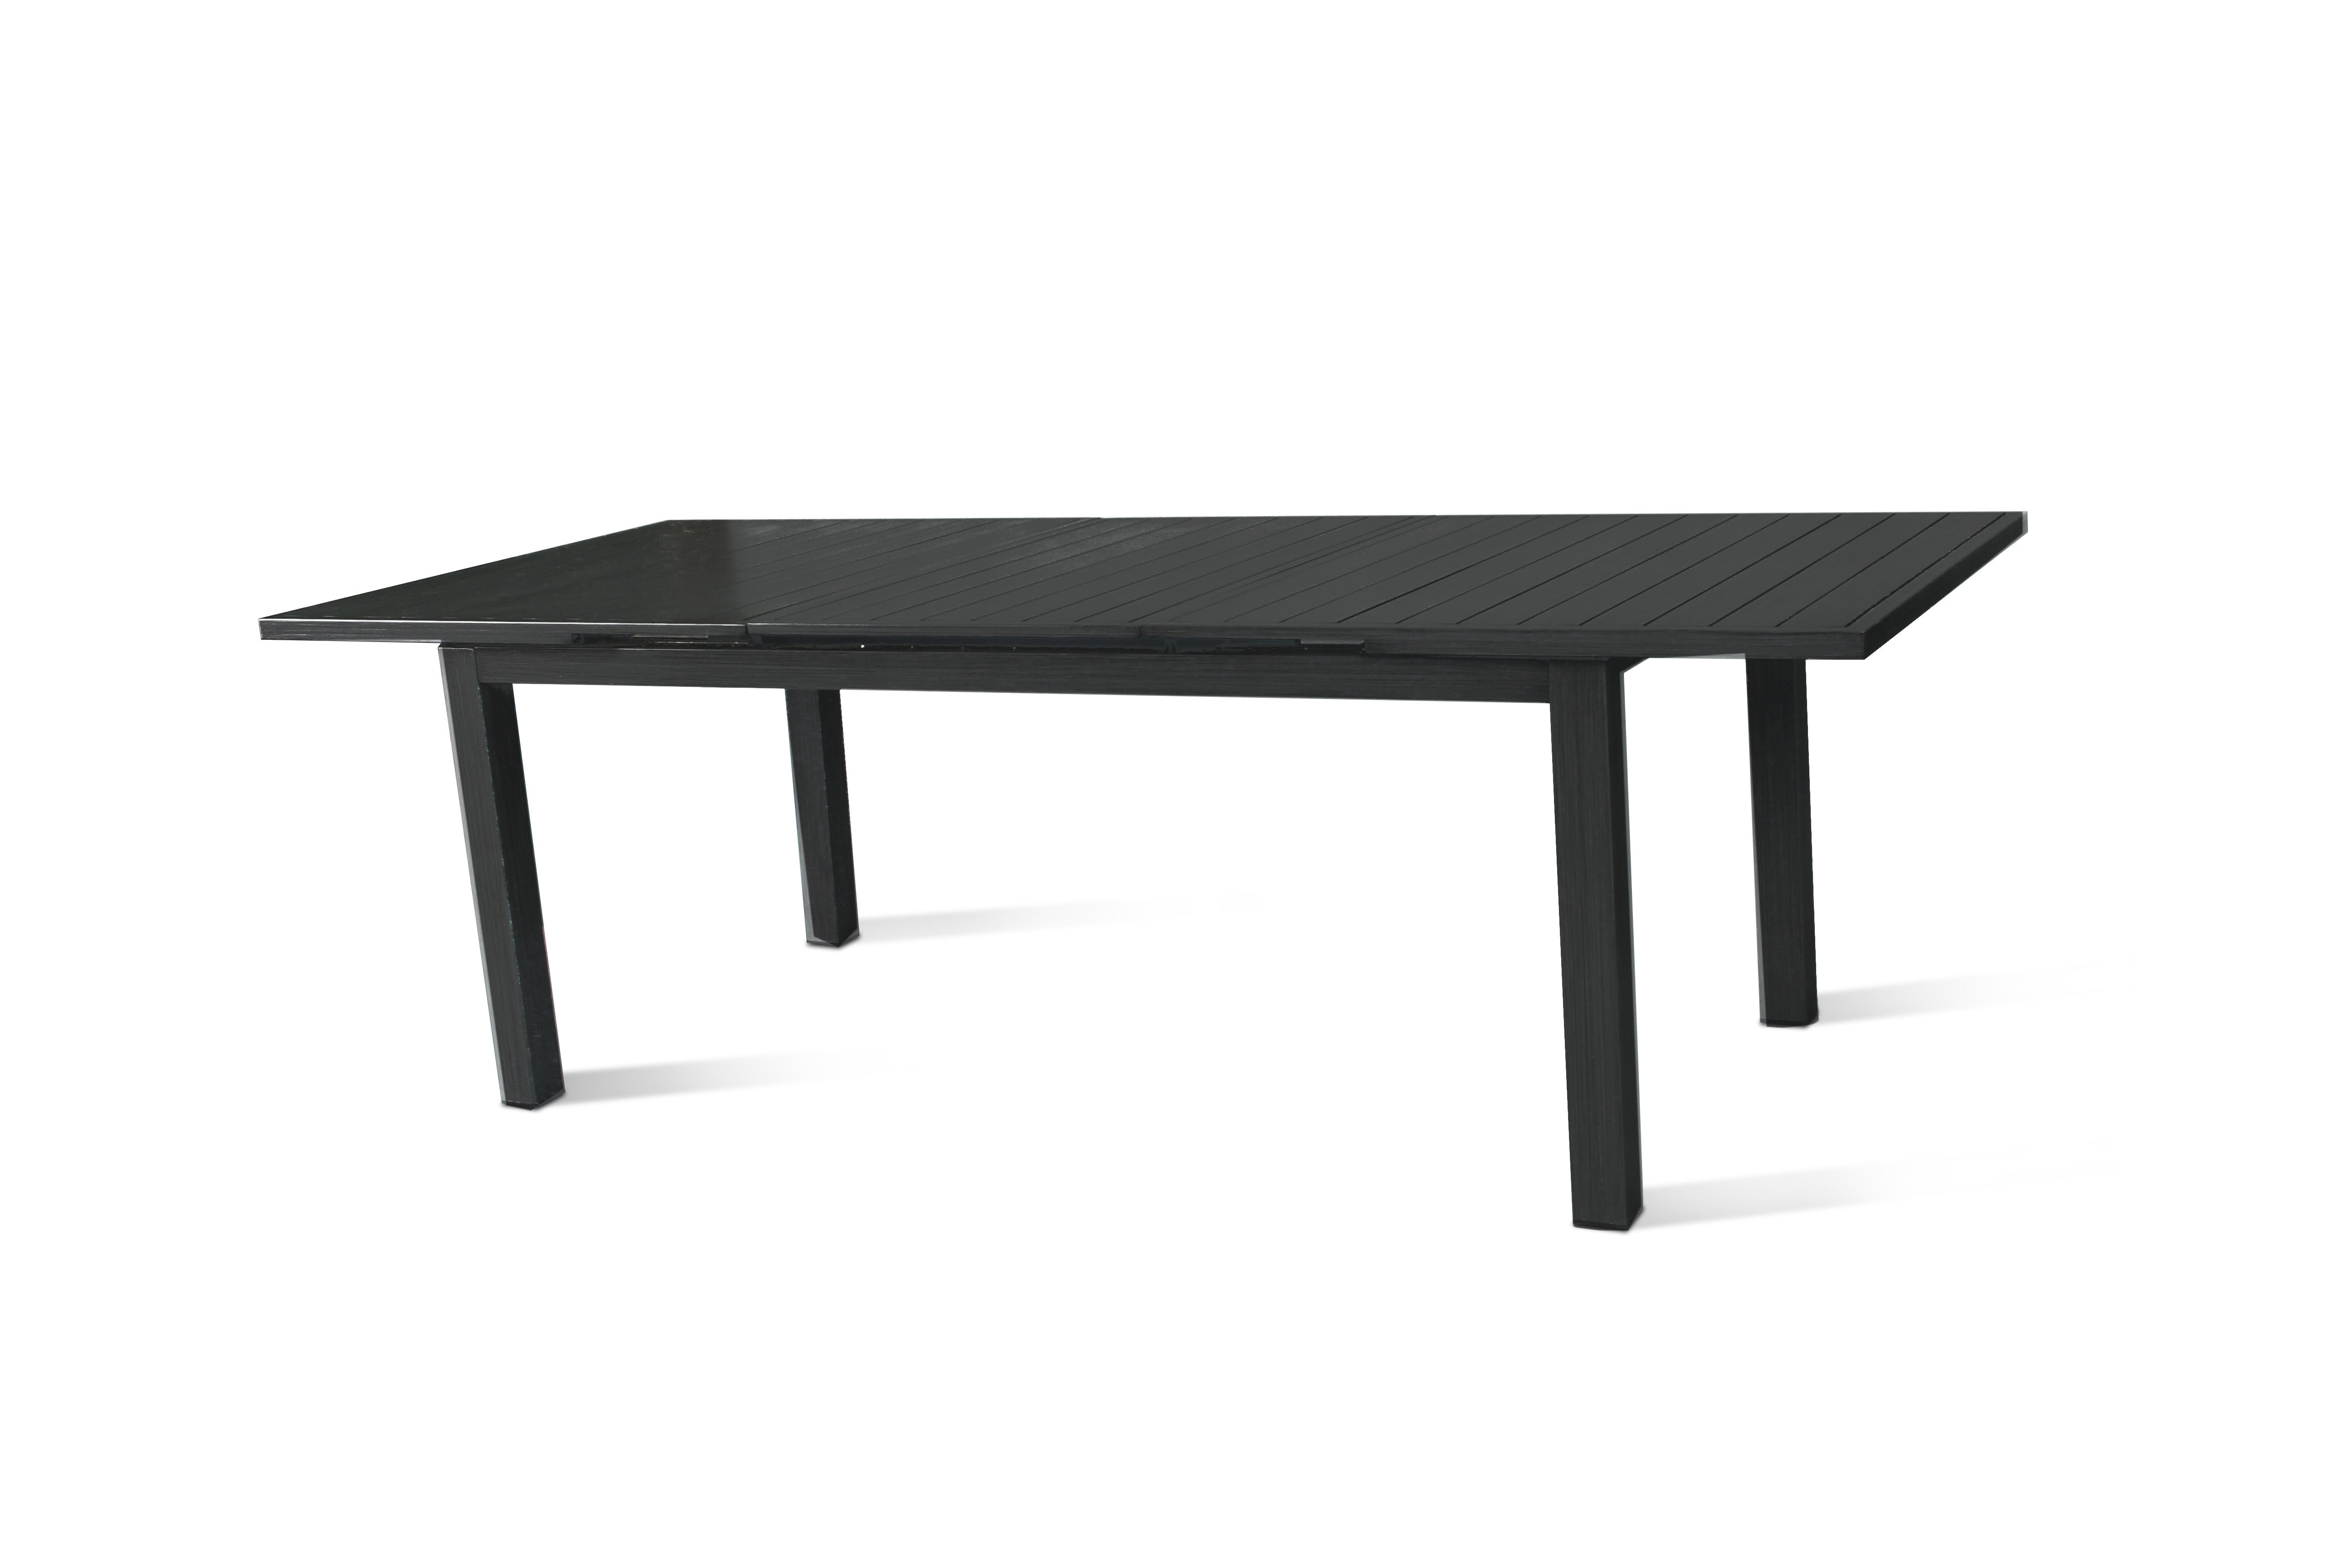 PatioZone Extendable Dining Table with Slated Tabletop (Butterfly Mechanism) Aluminum Frame (MOSS-T206N) - Matte Black